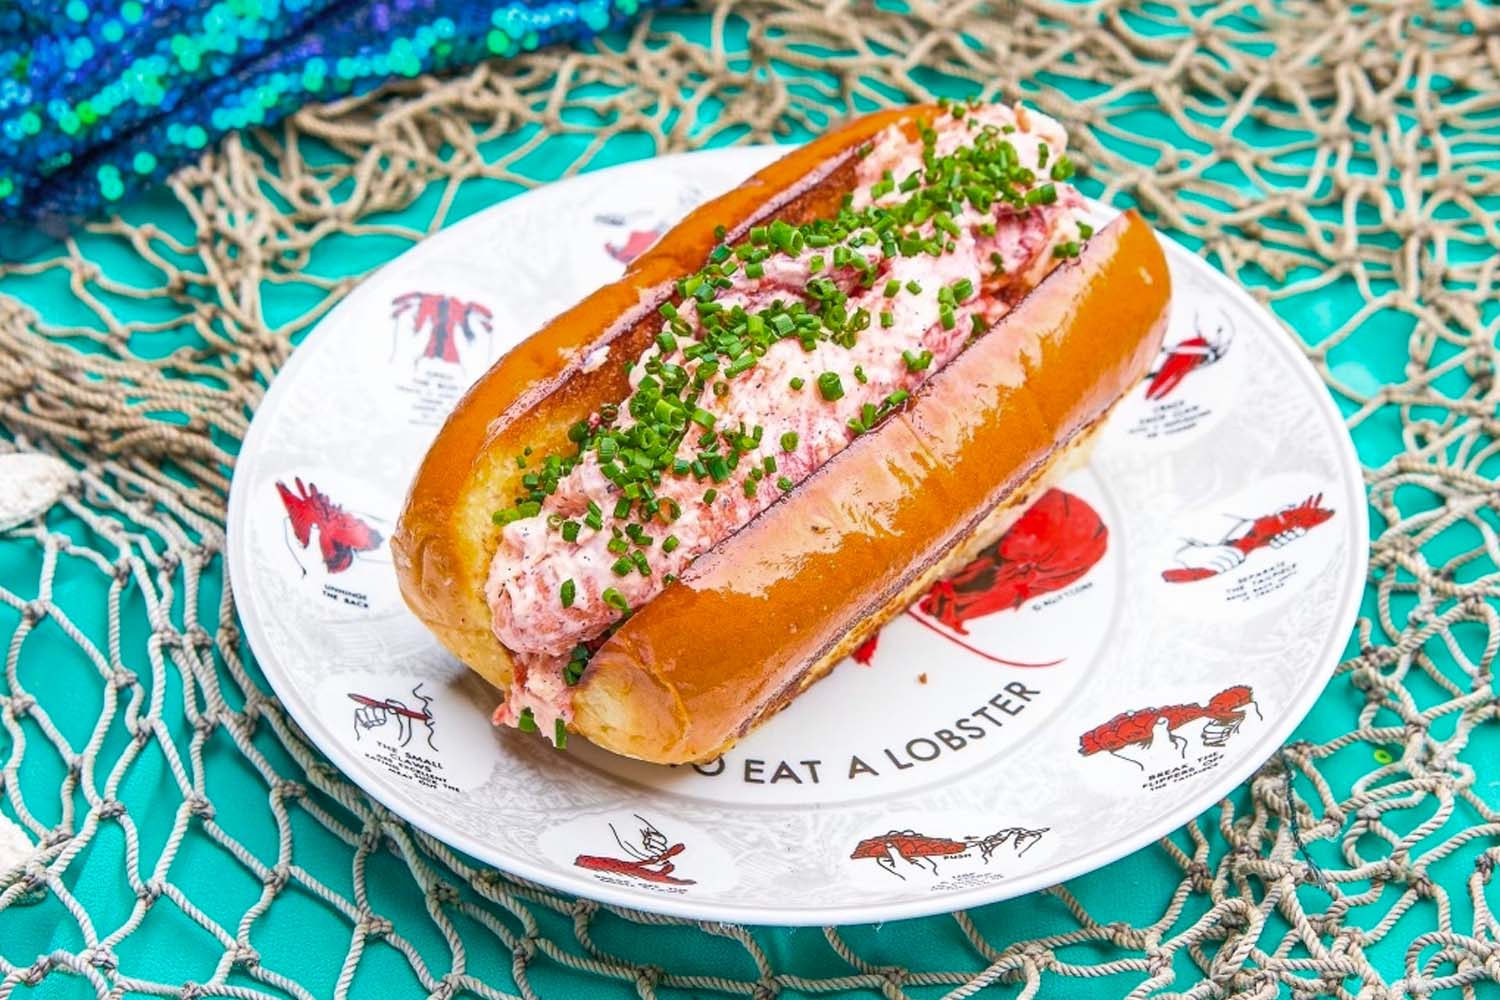 Broad Street Oyster Company's famous lobster roll